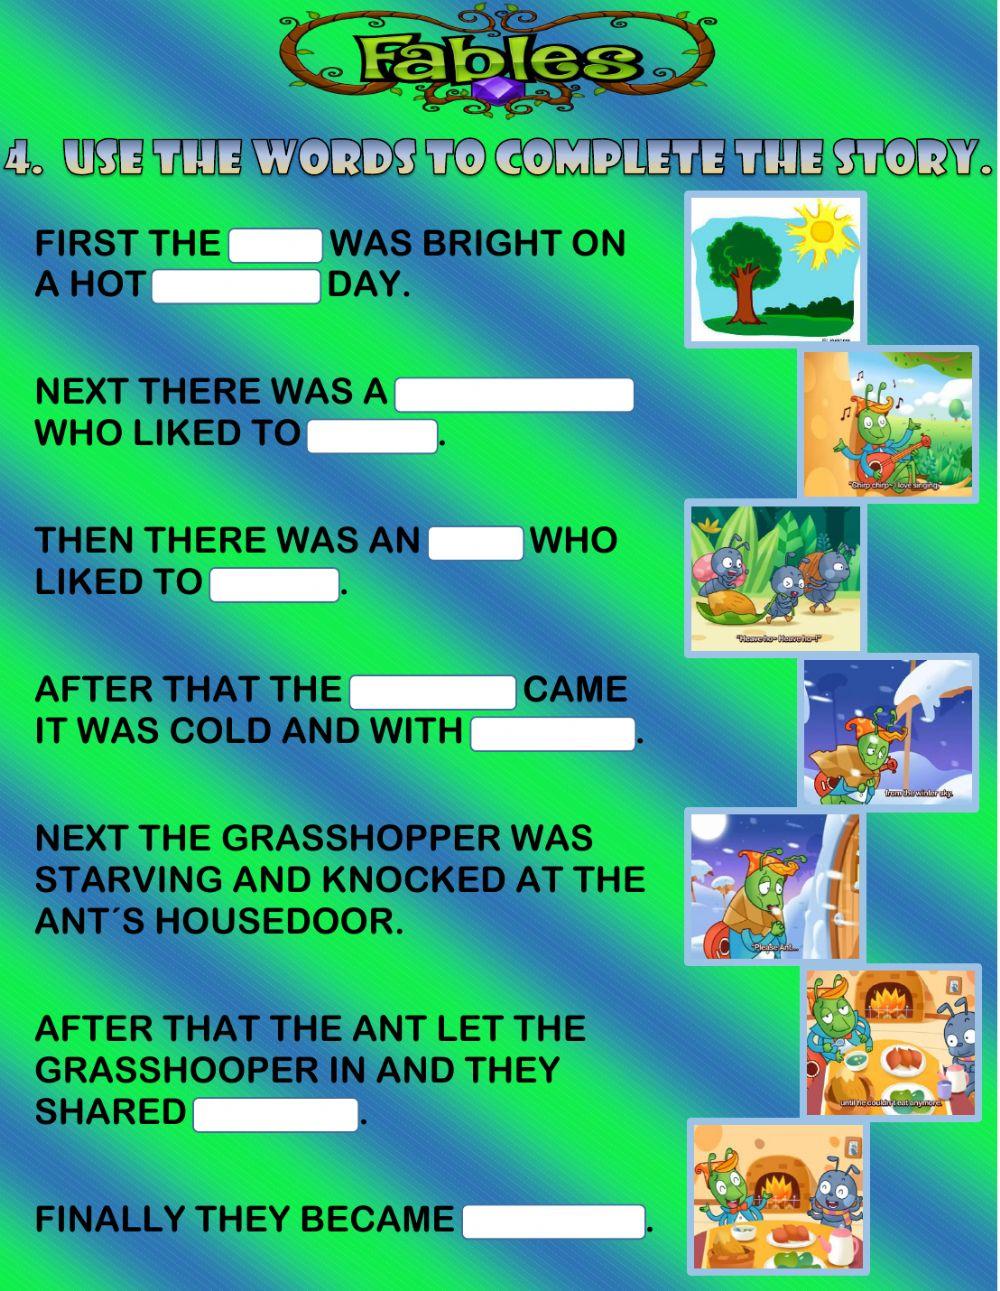 Fable: THE ANT AND THE GRASSHOPPER